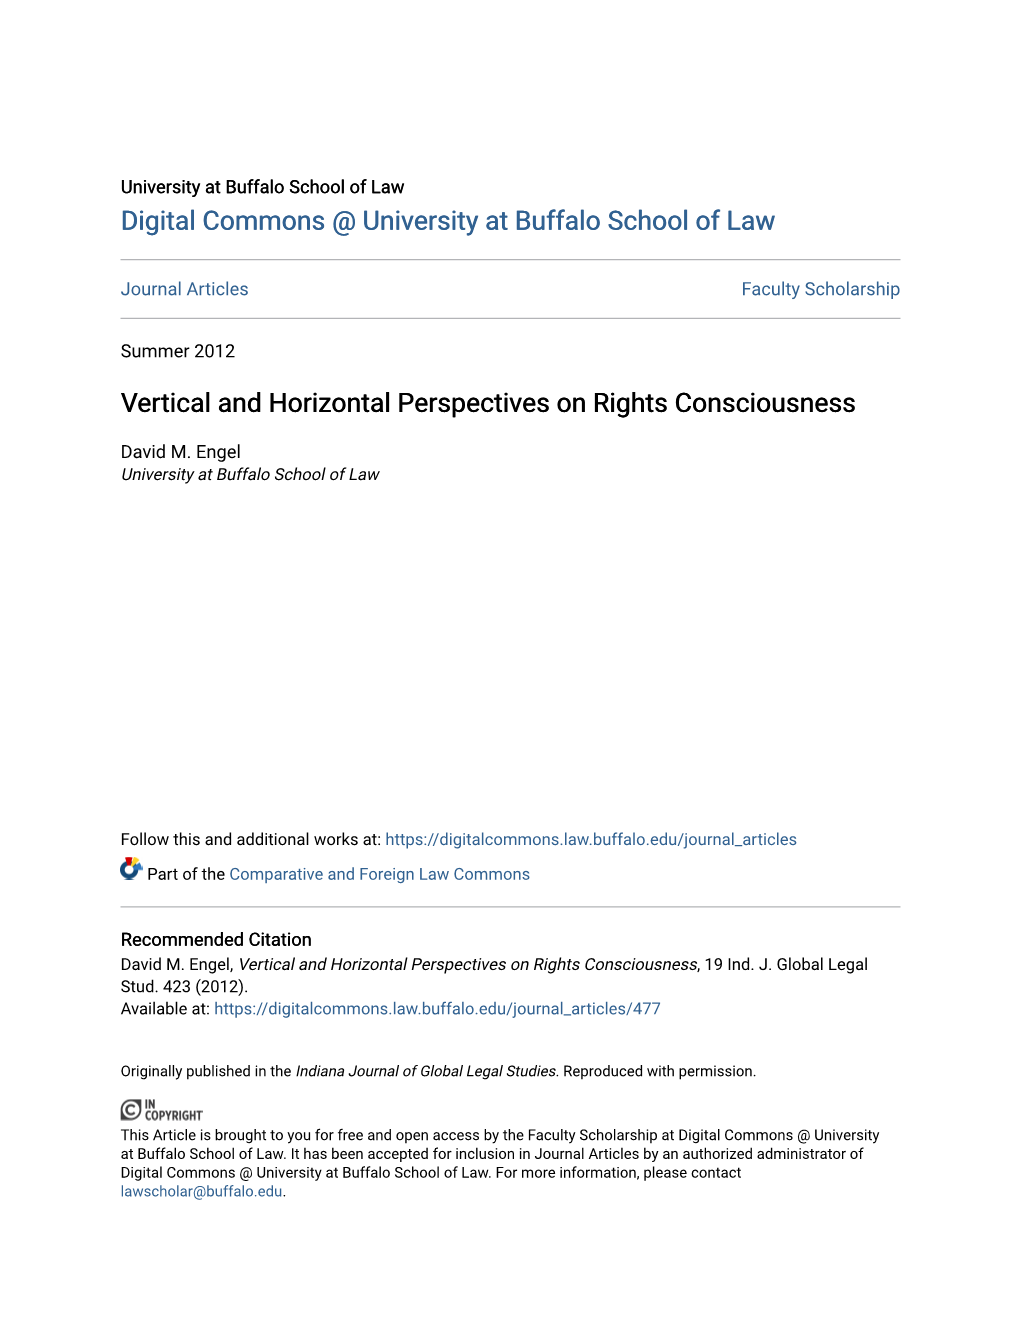 Vertical and Horizontal Perspectives on Rights Consciousness